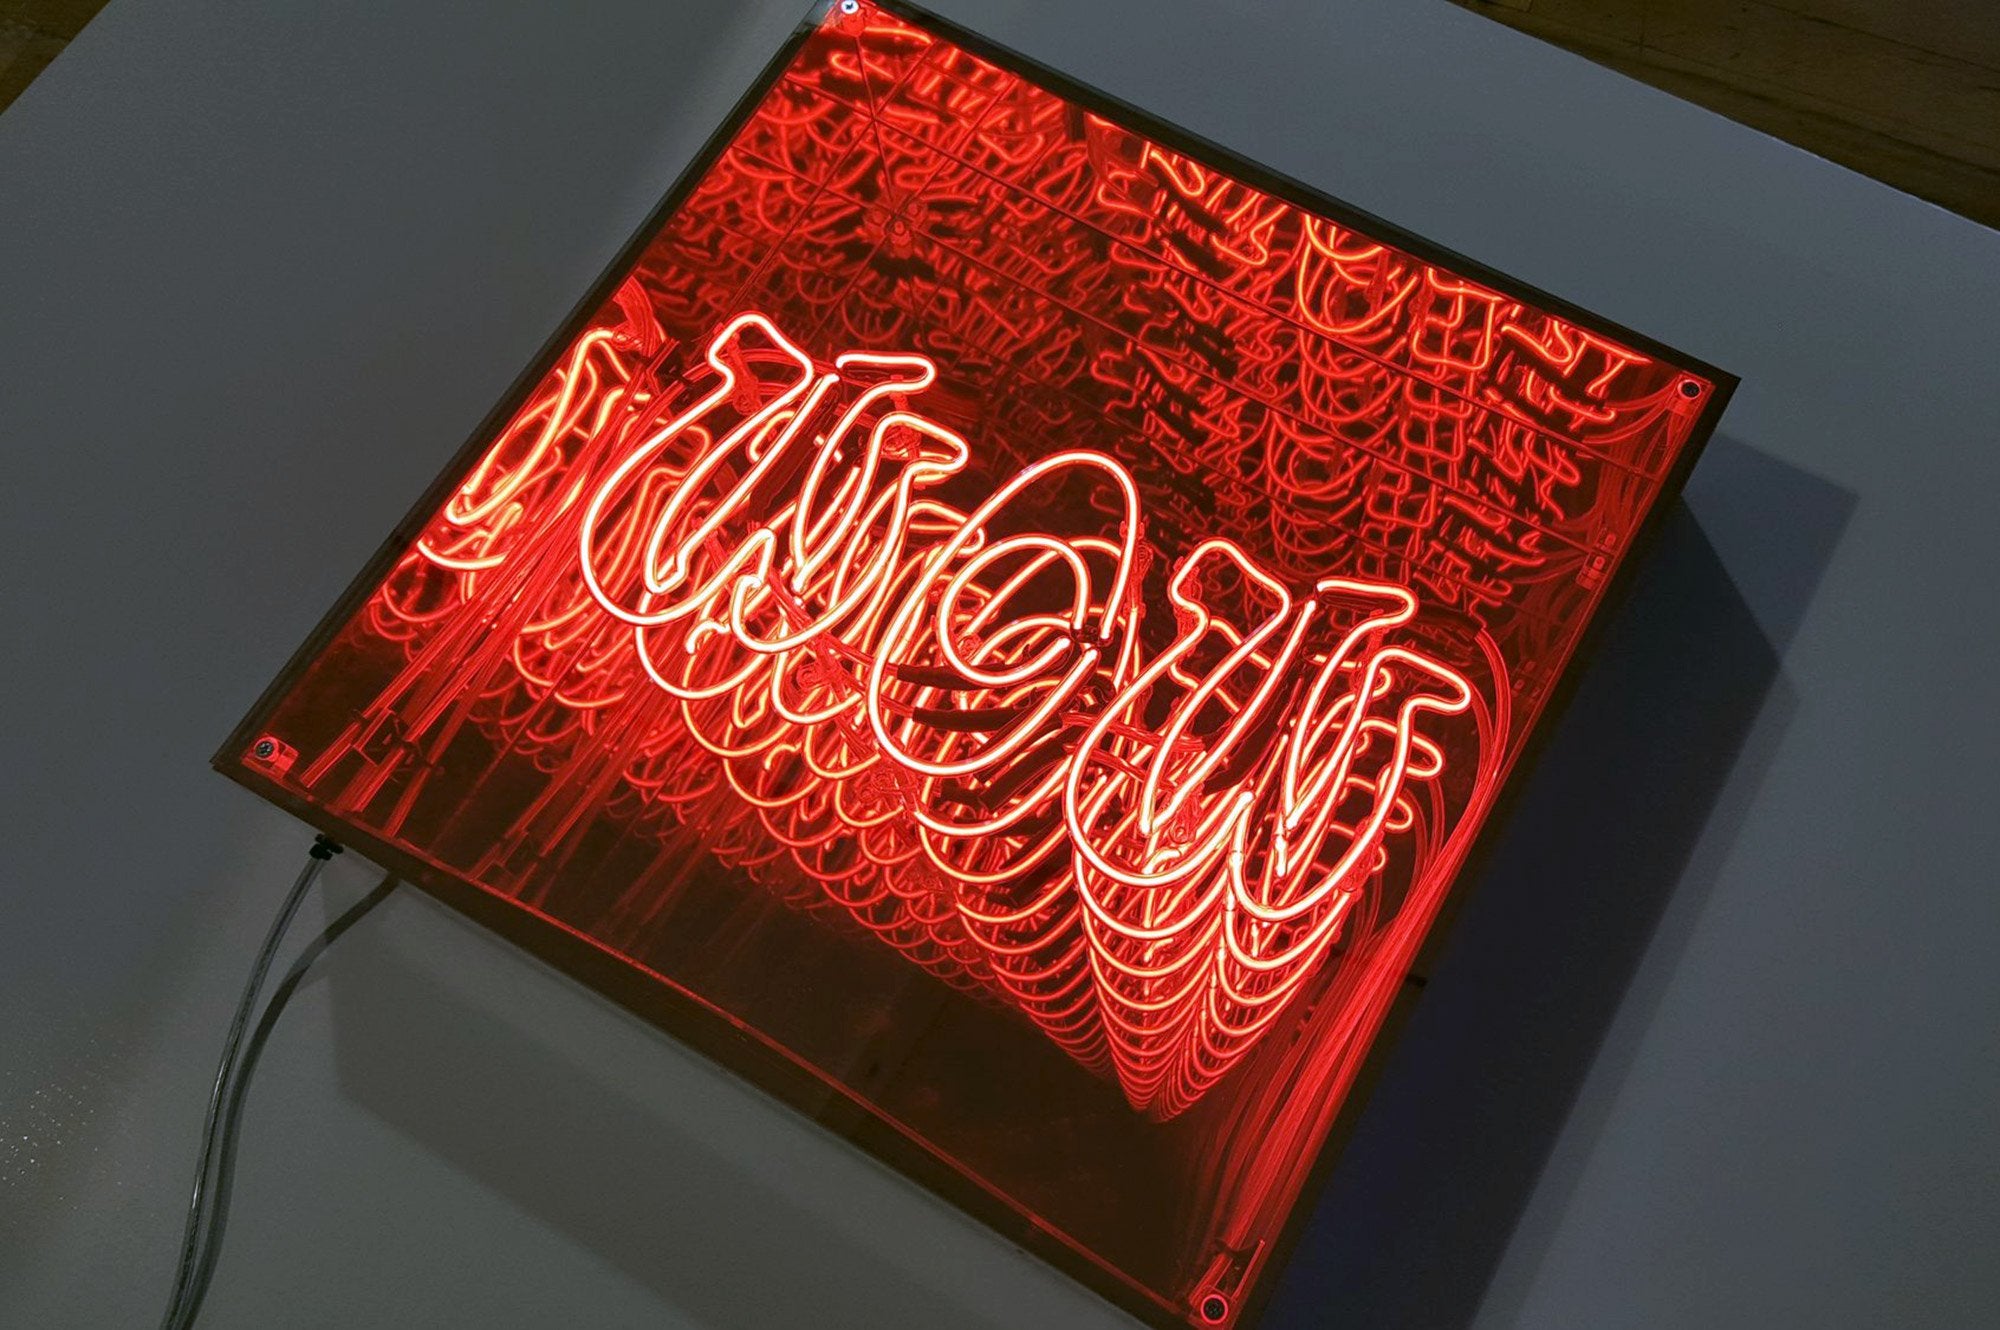 WOW' red neon infinity box. Real glass neon fitted into an infinity box.